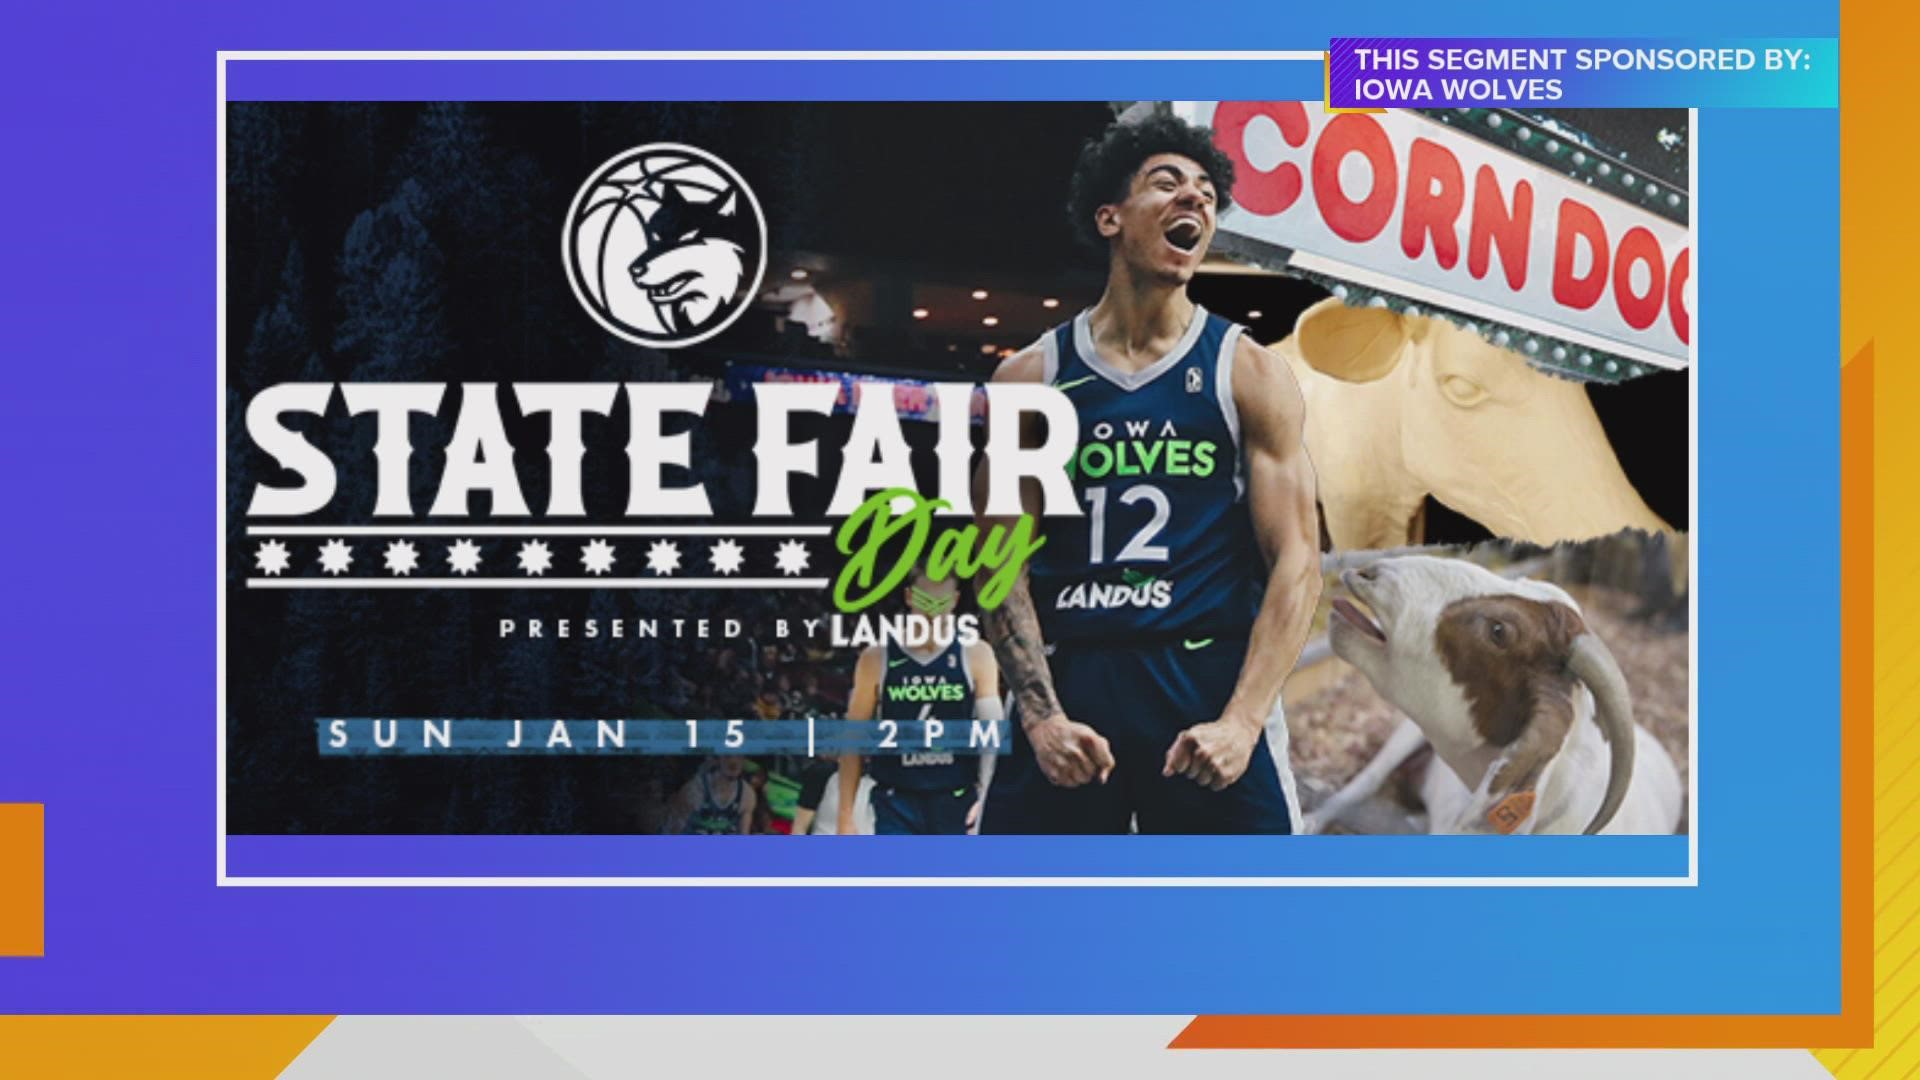 Chip Albright, IA Wolves and Ann Appleseth, Landus stop by to talk about "Iowa State Fair Day" at the Iowa Wolves game Sunday at 2pm | Paid Content